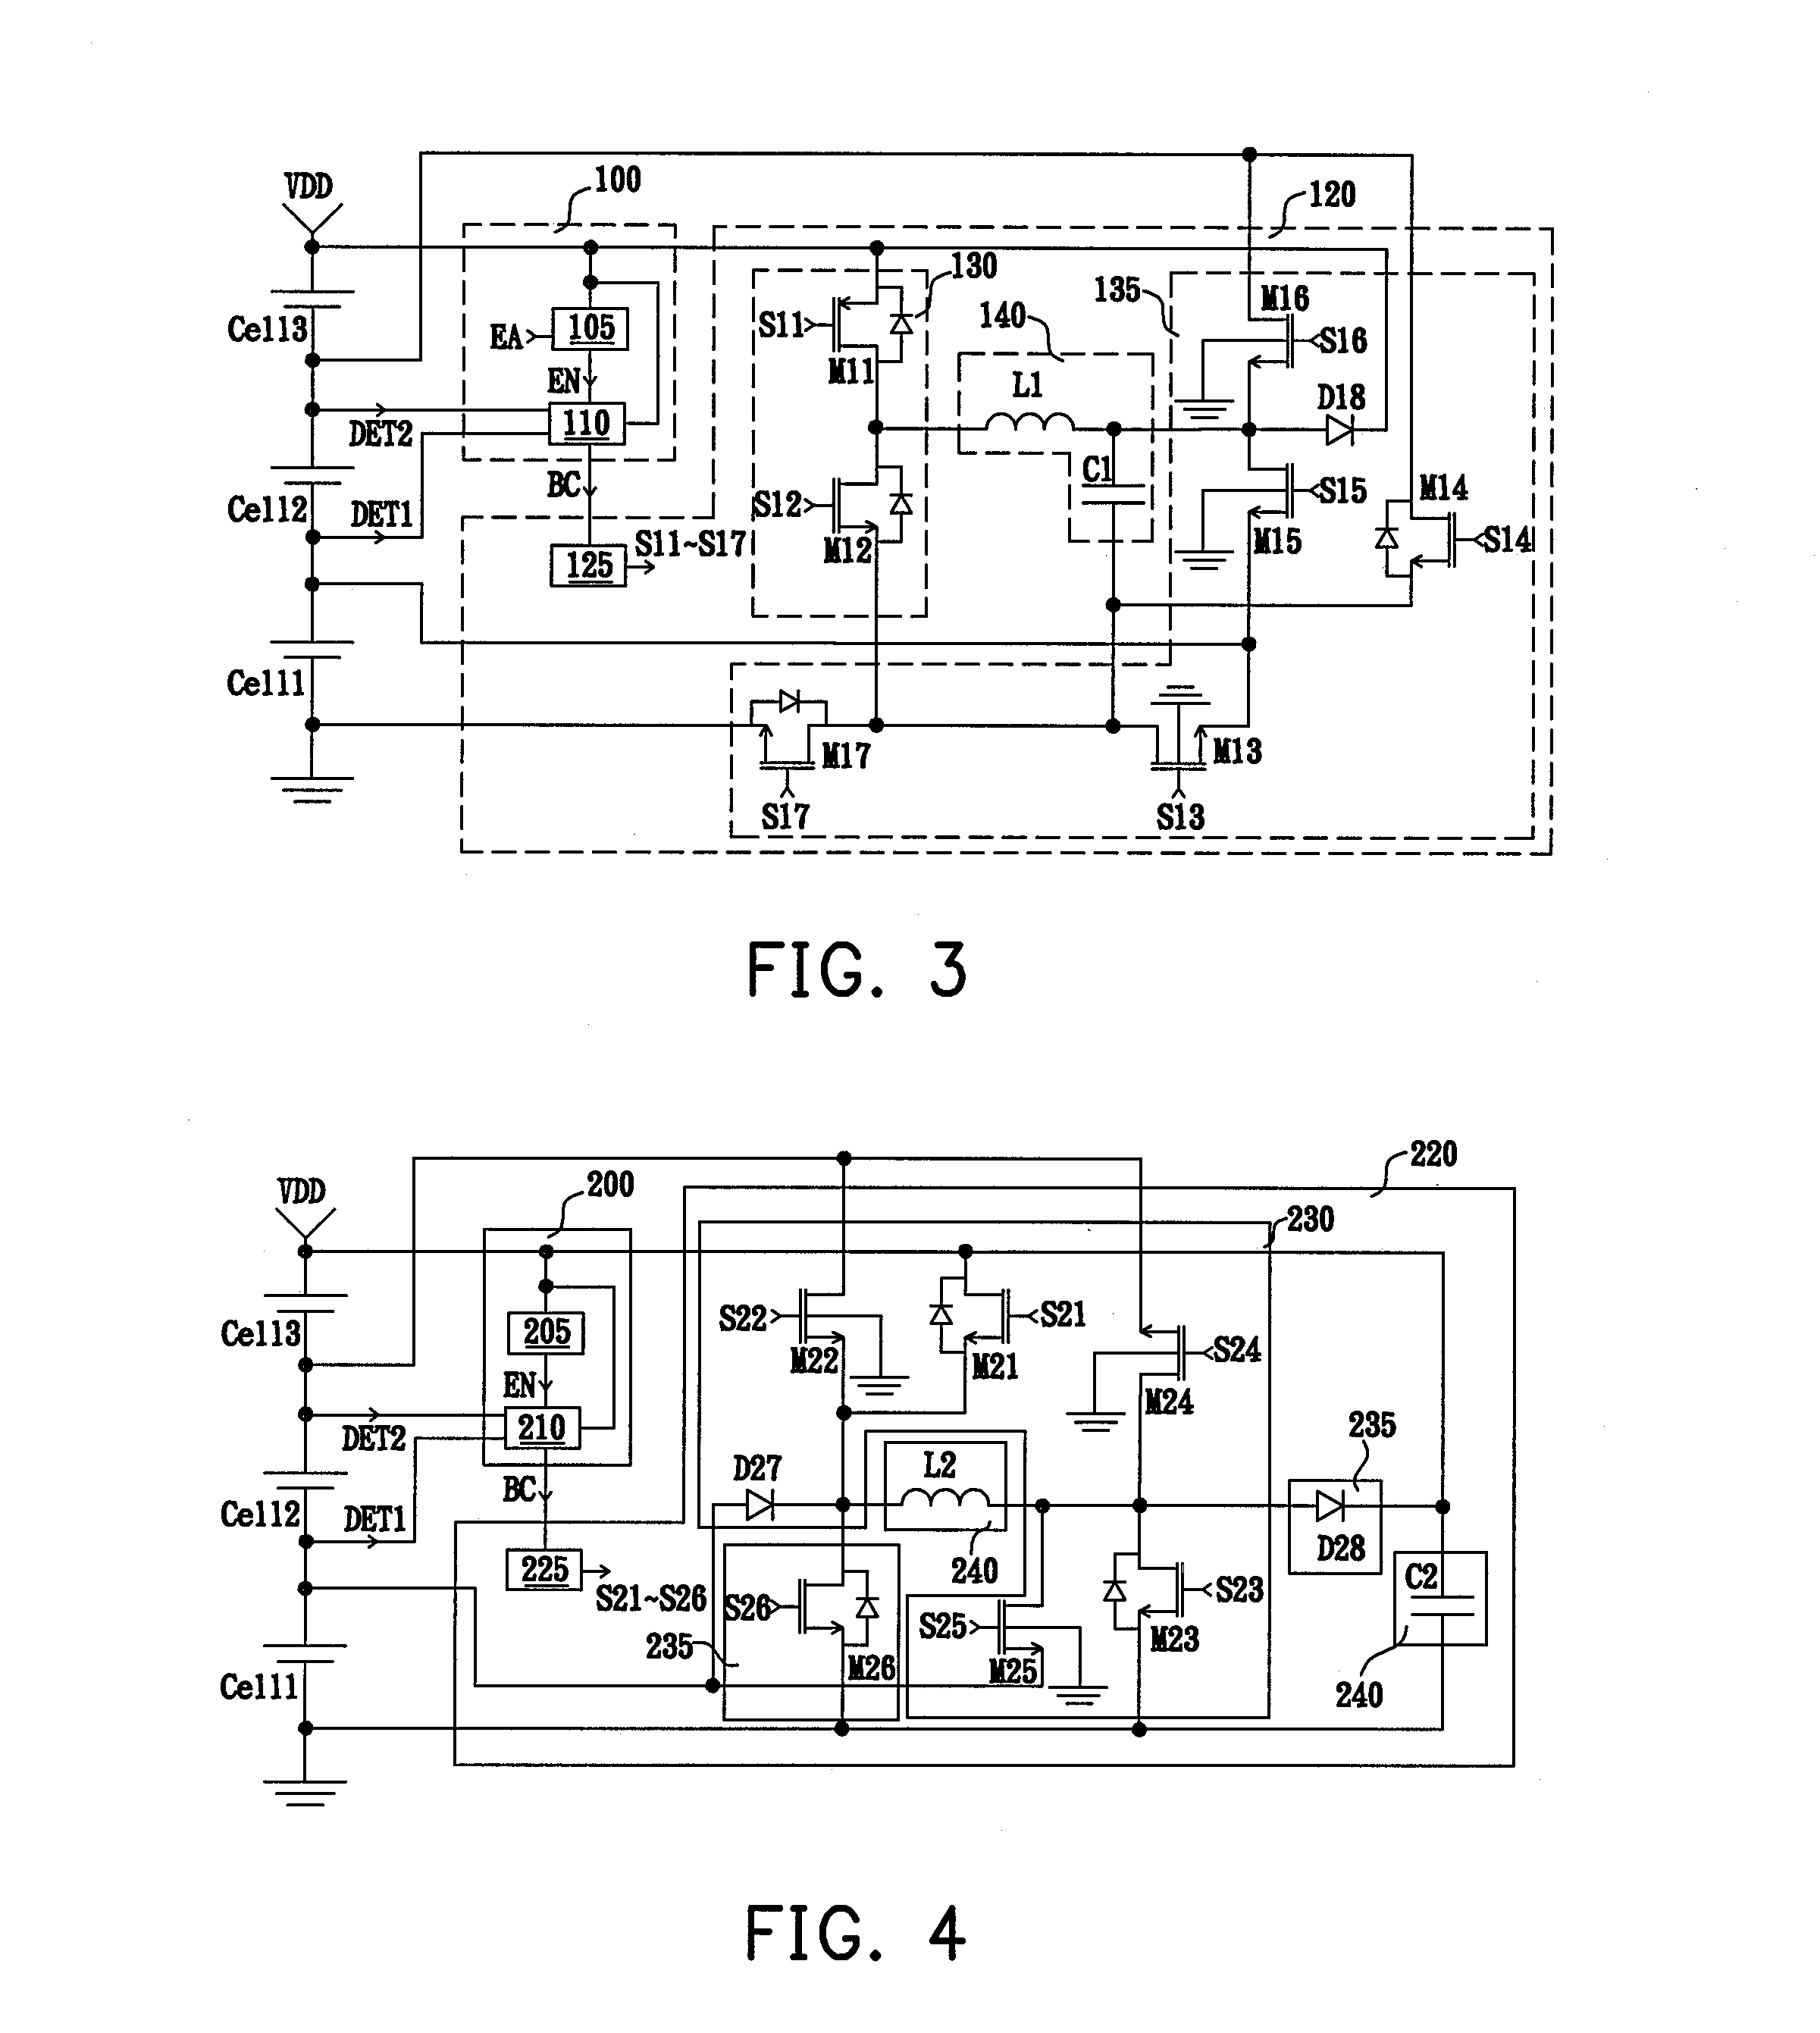 Battery voltage balance apparatus and battery charge apparatus